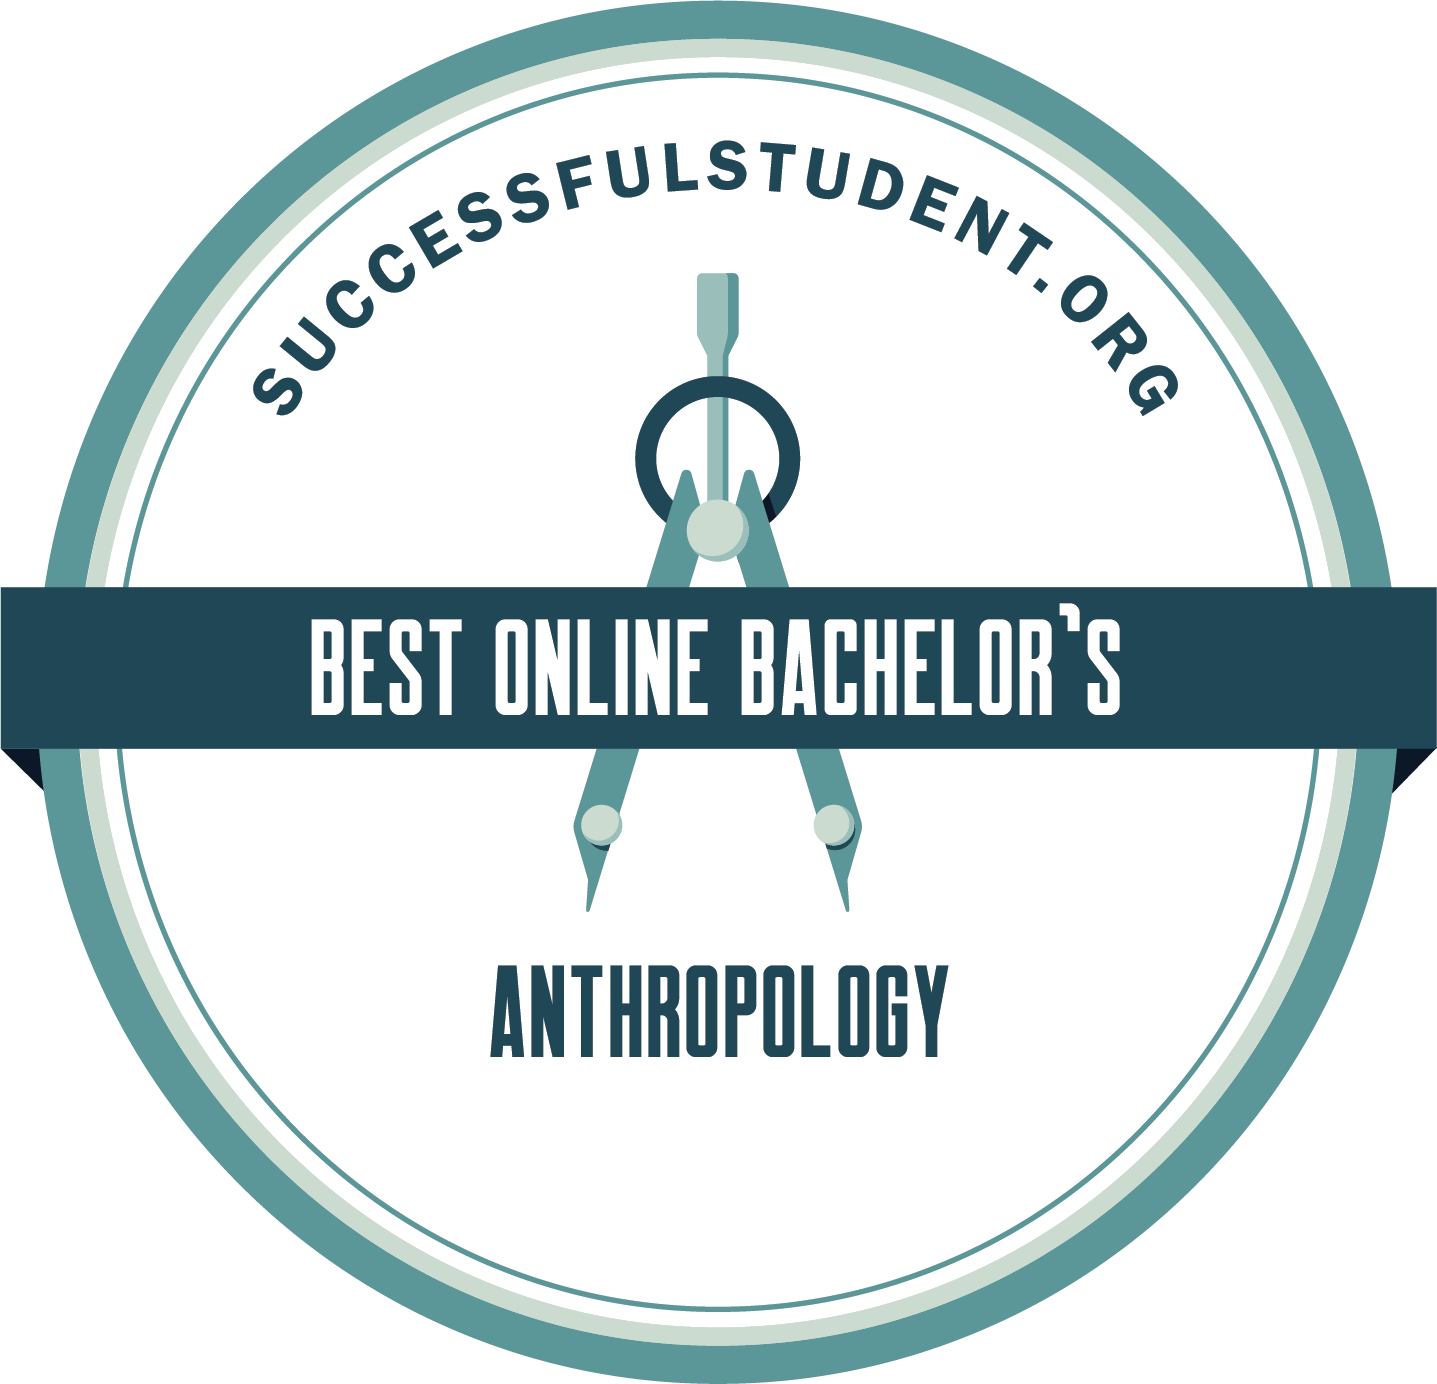 The Best Online Bachelor’s Programs in Anthropology's Badge